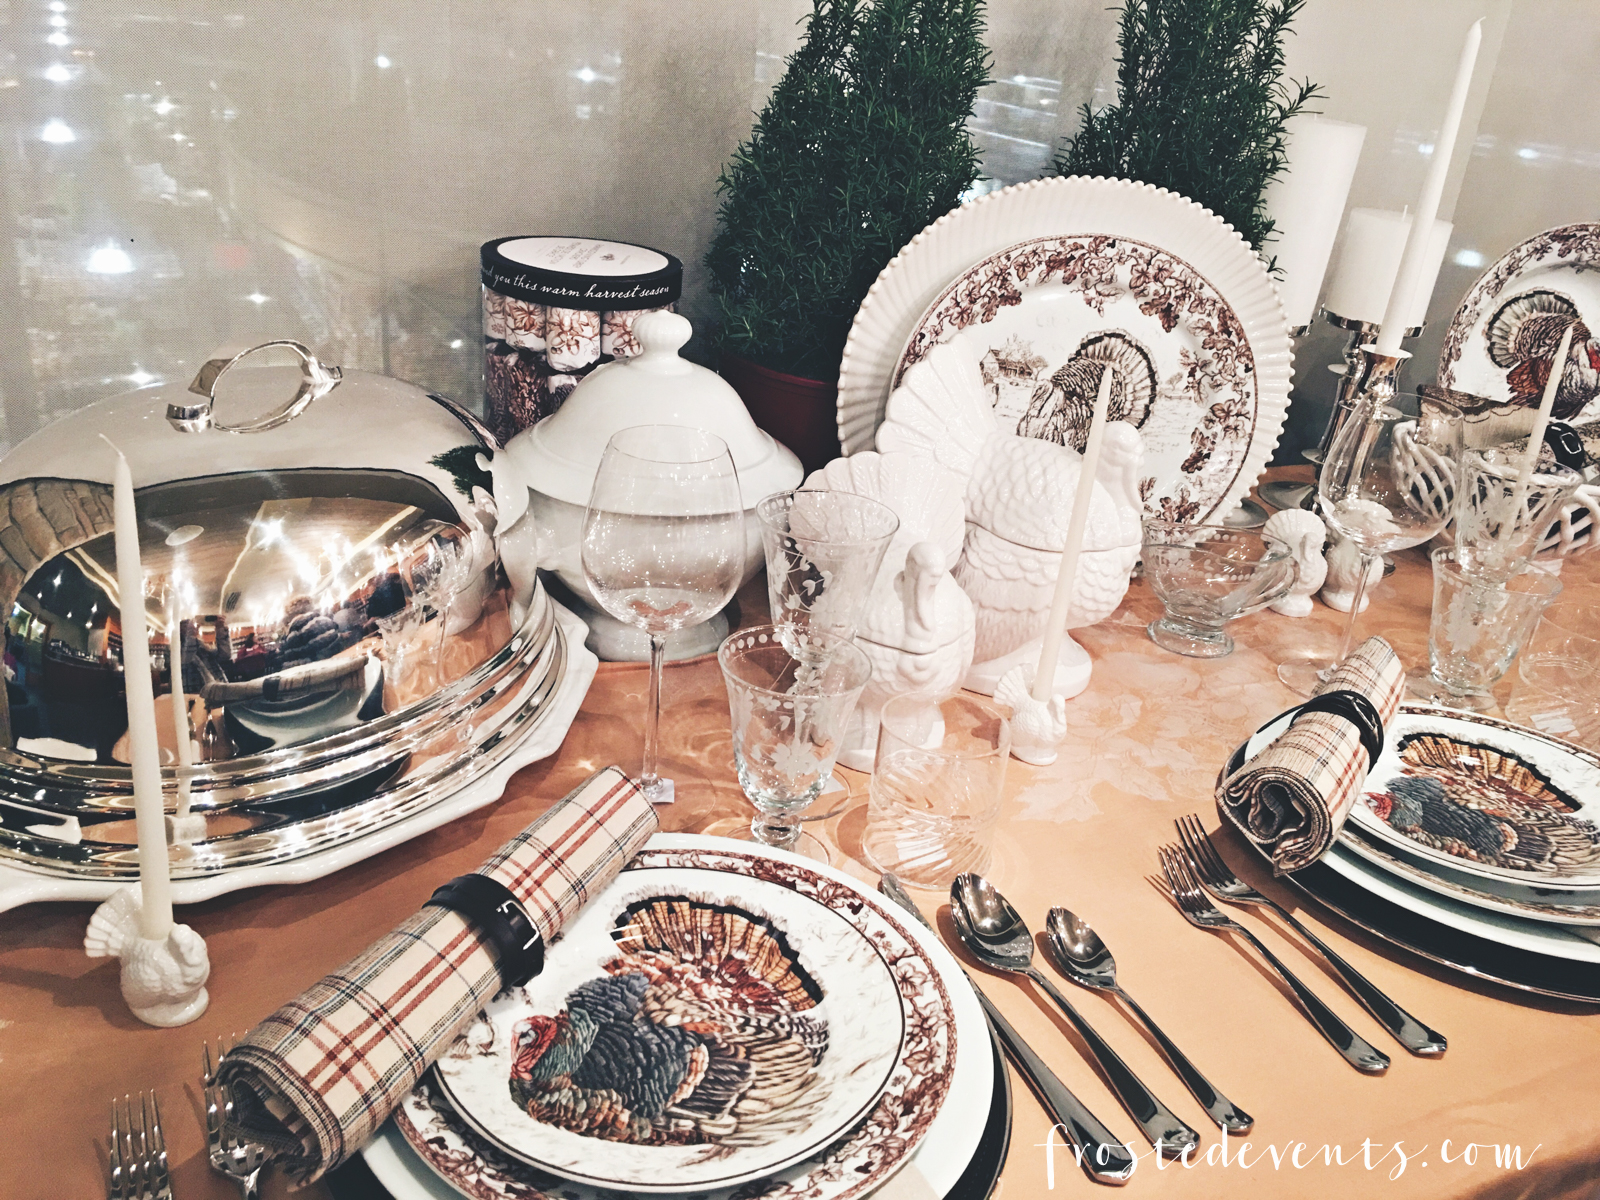 Thanksgiving Dinner Whole Foods and Williams Sonoma Table Decor via Misty Nelson @frostedevents frostedMOMS 